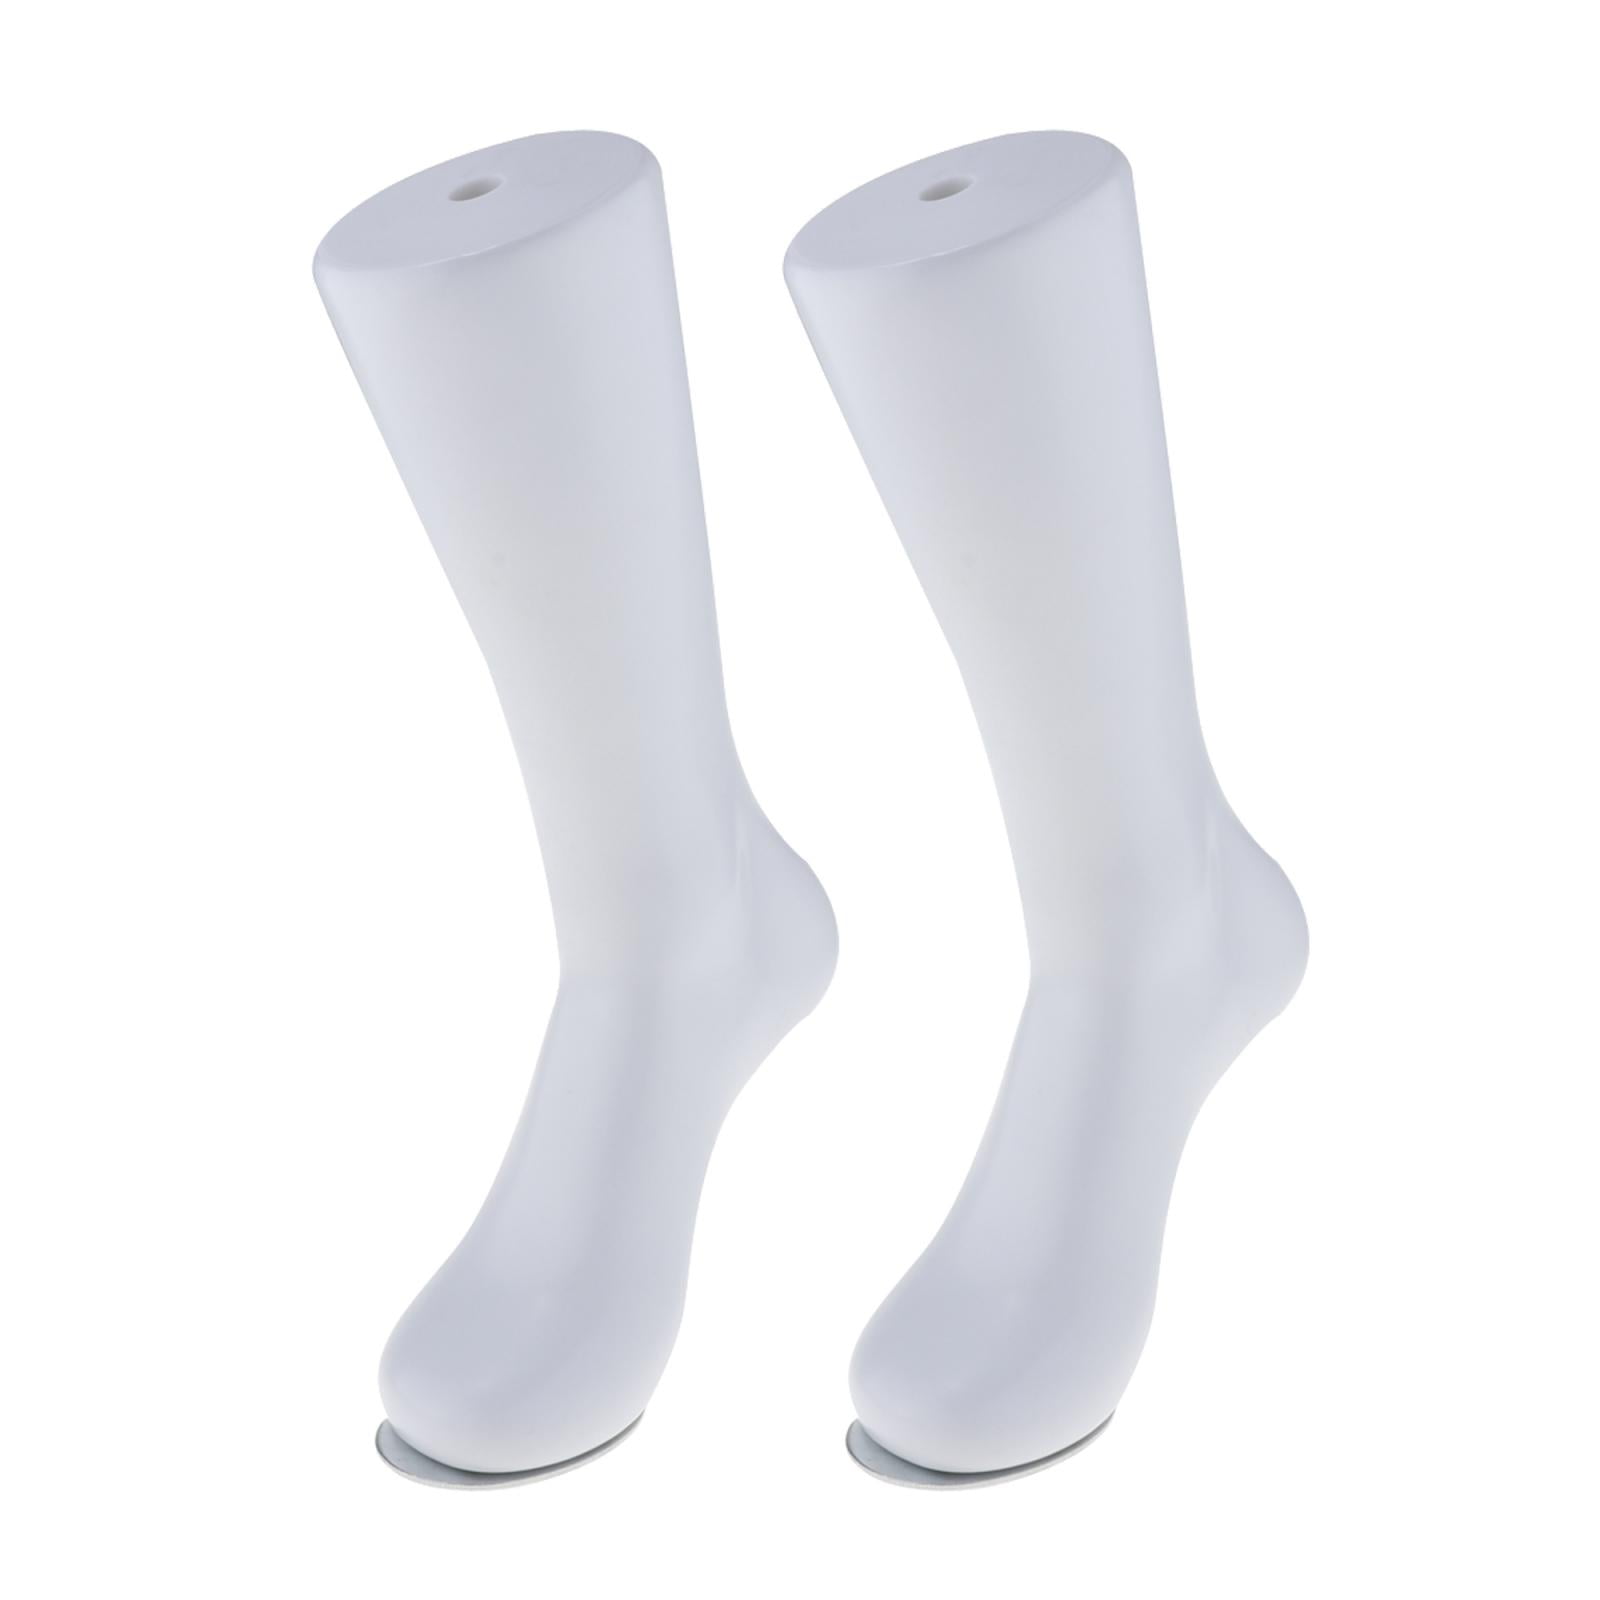 Male Mannequin Foot Flesh Tone Sox/Sock Display 36cm Male White 